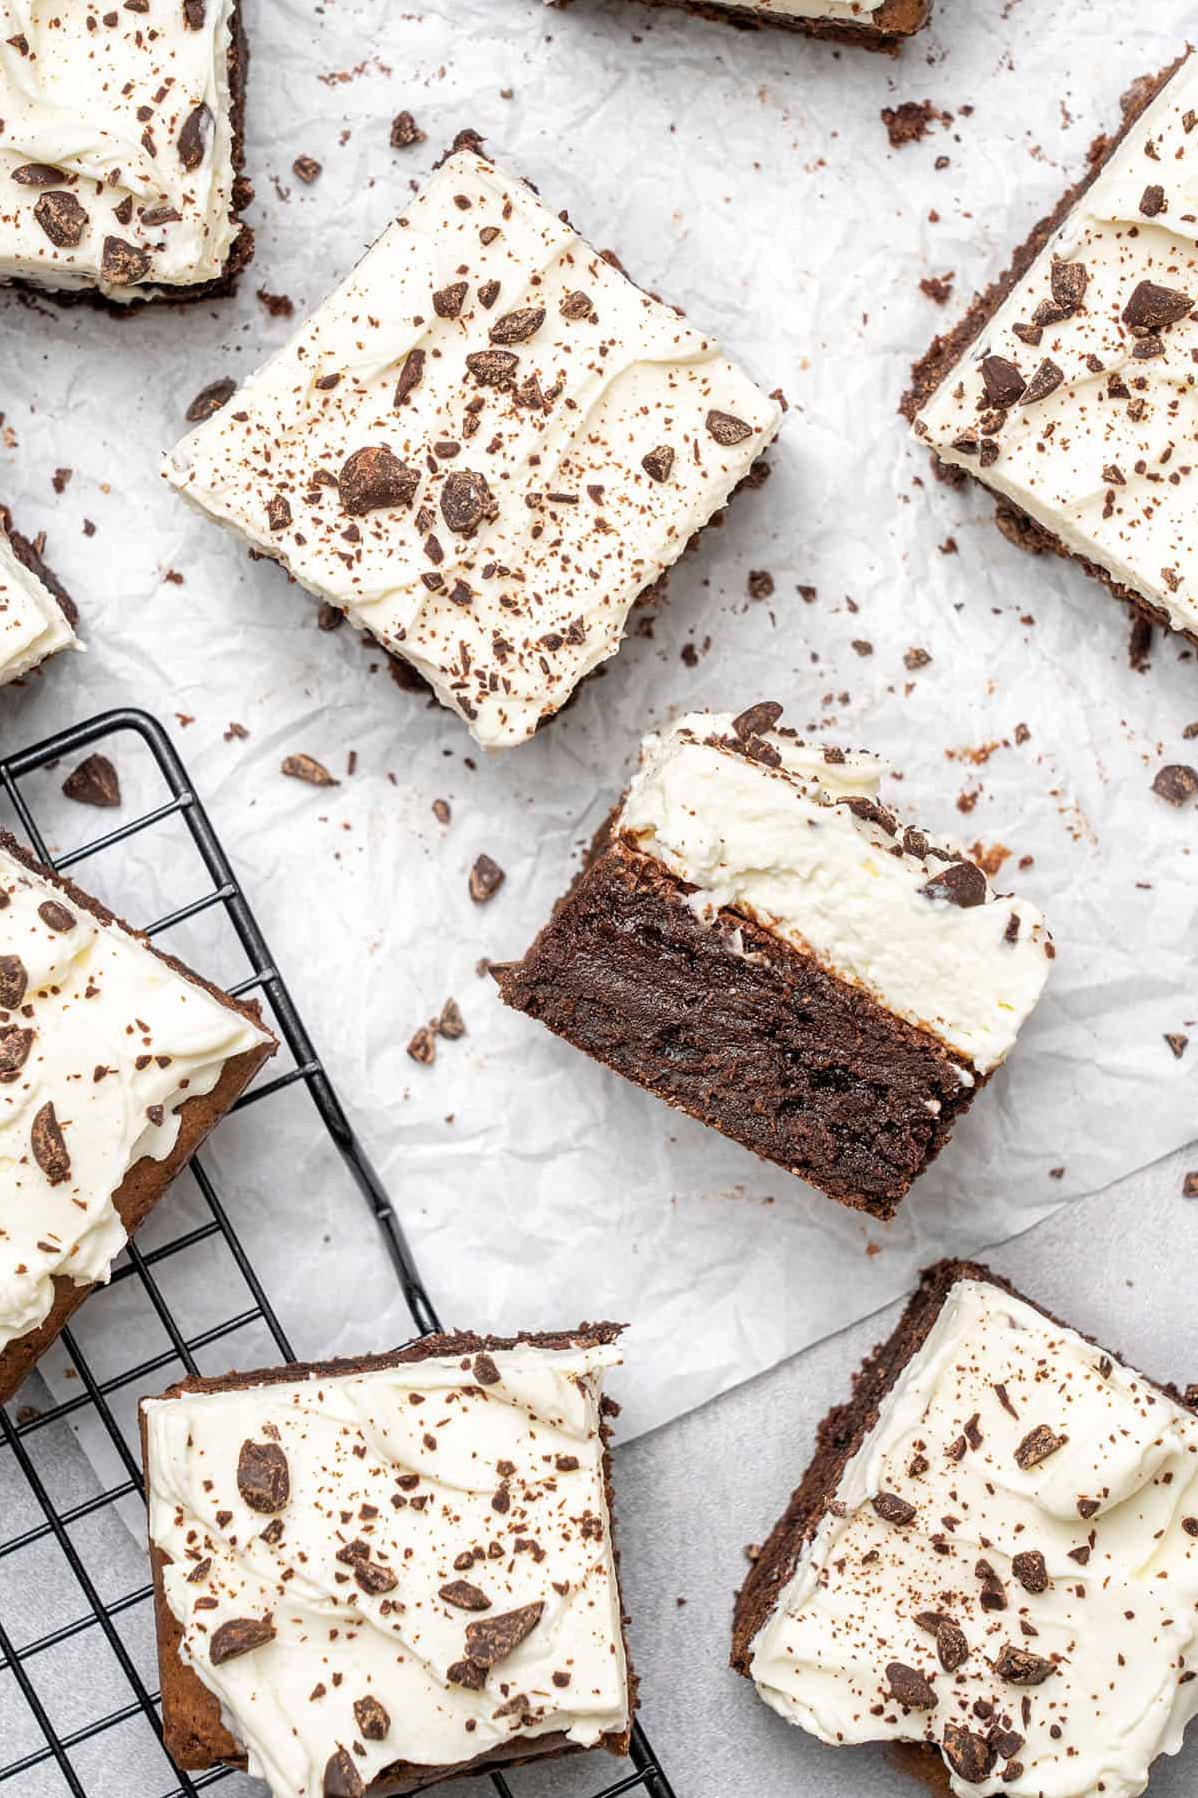  Brownies that will make the coffee lovers' dreams come true